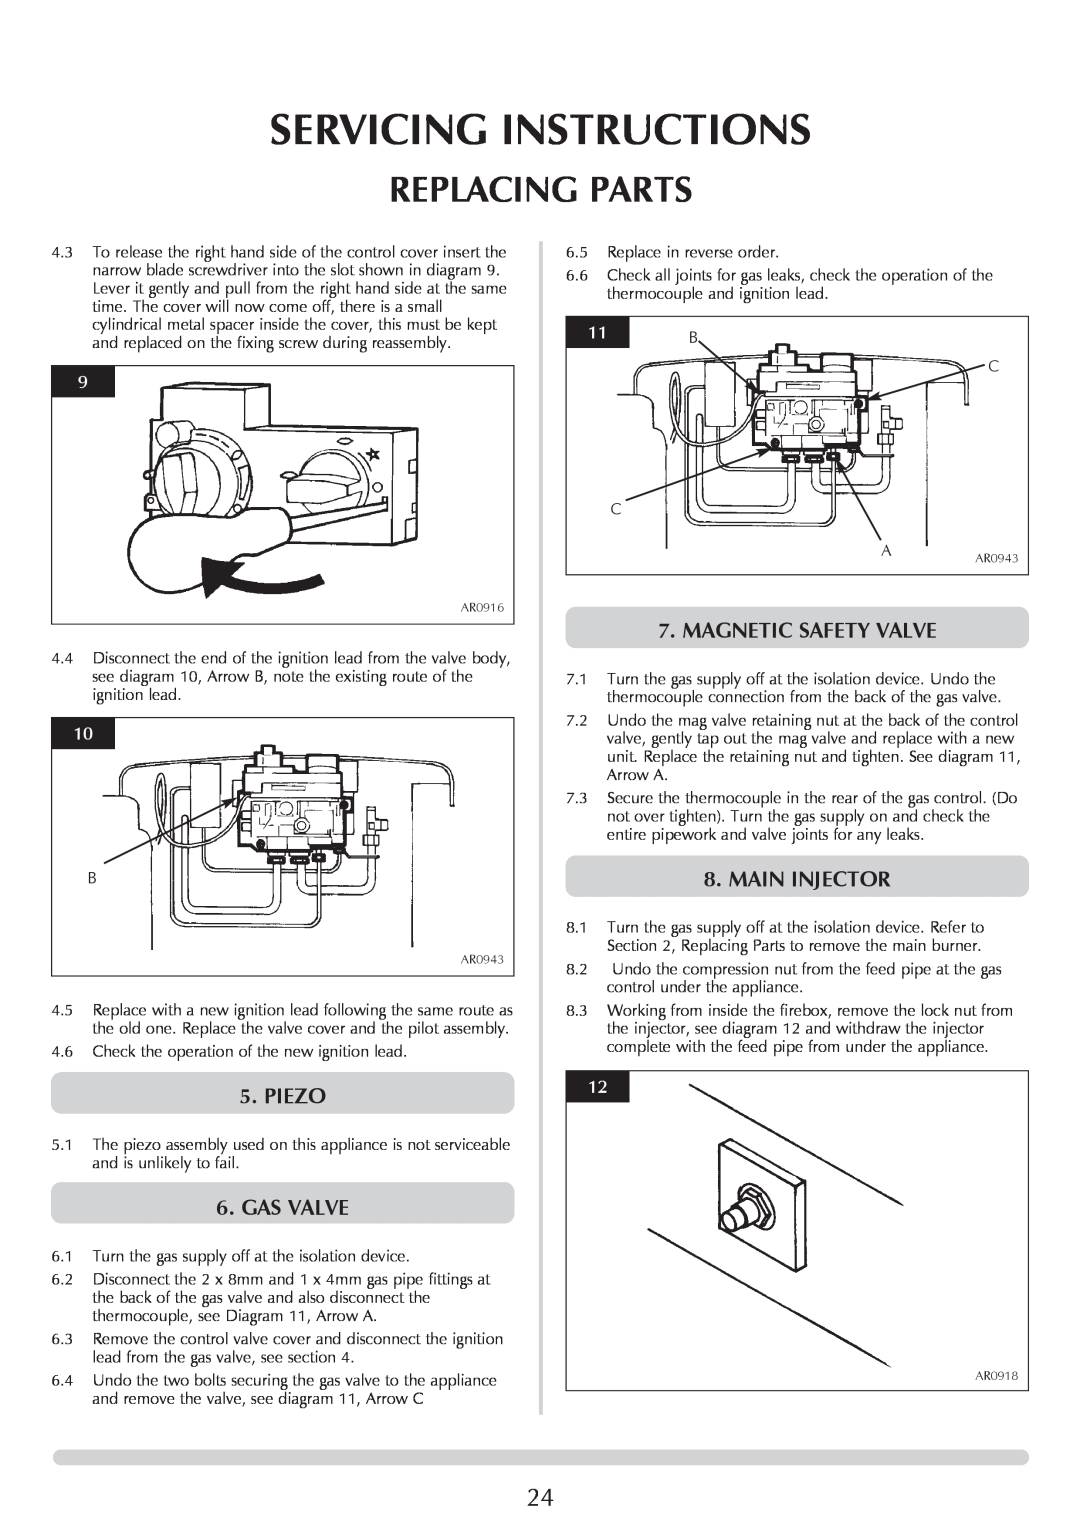 Stovax Ceramica Manhattan Wood Stove Servicing Instructions, Replacing Parts, Piezo, Gas Valve, Magnetic Safety Valve 